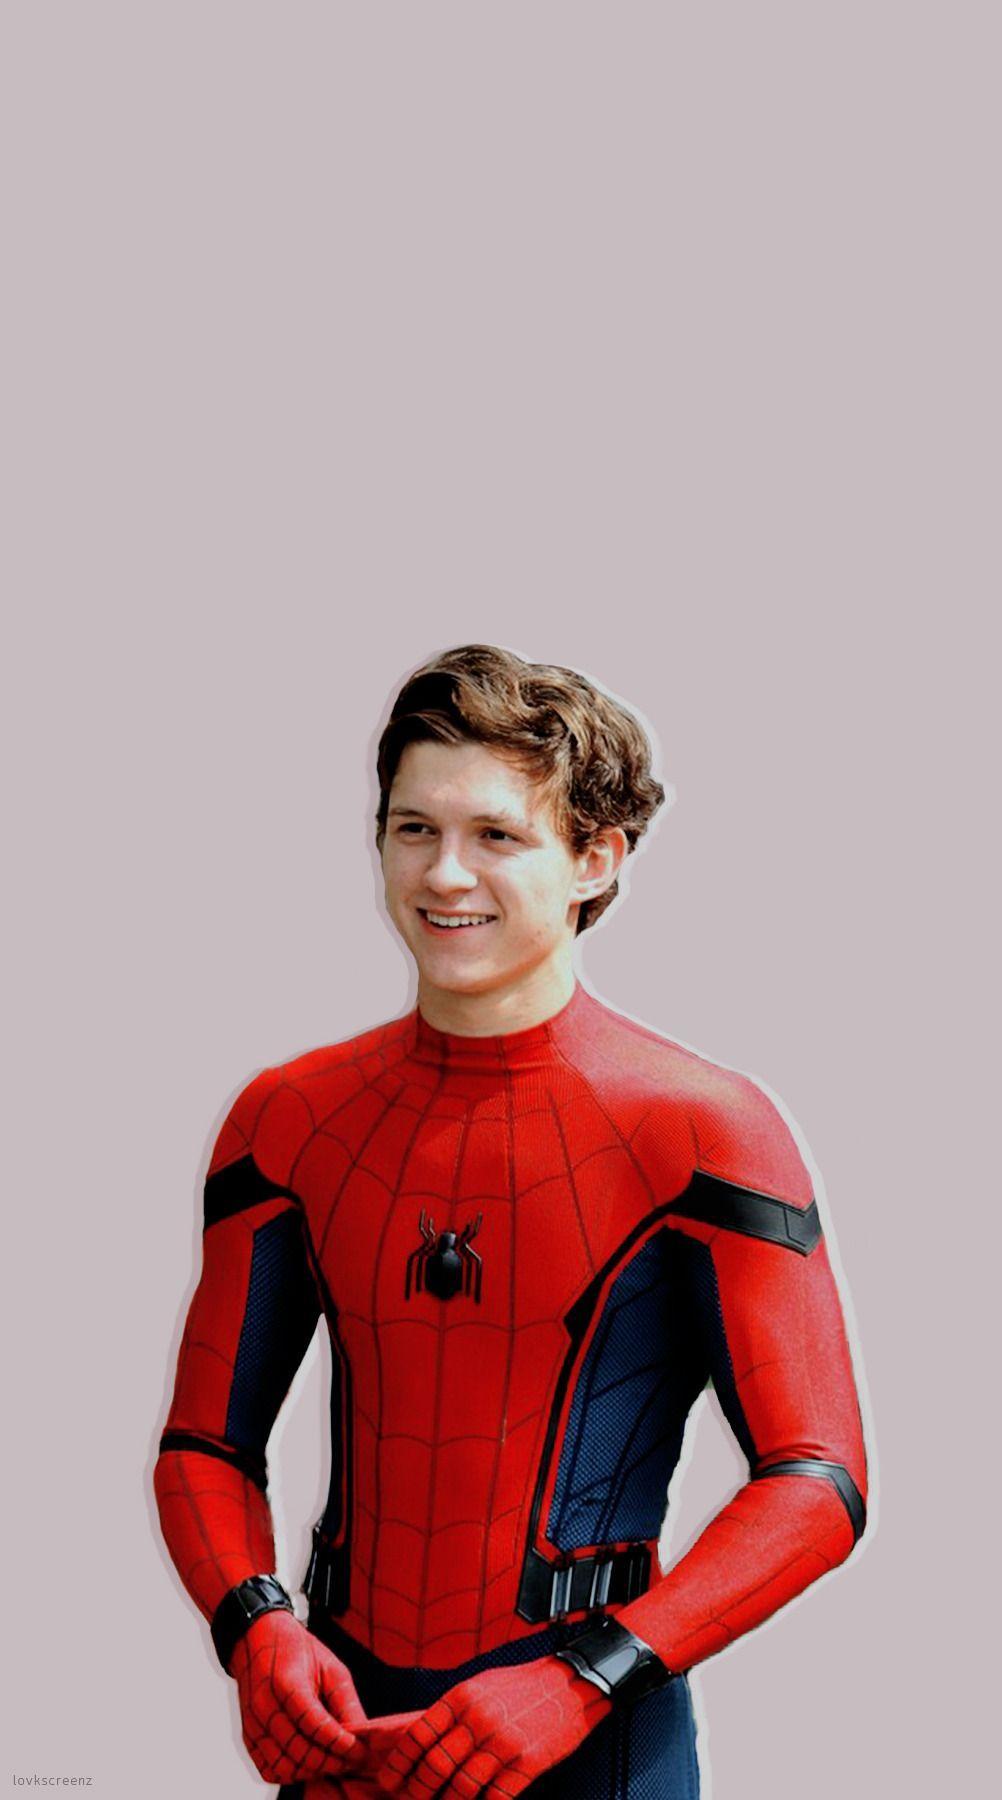 Spider Man Aesthetic Wallpaper Free Spider Man Aesthetic Background